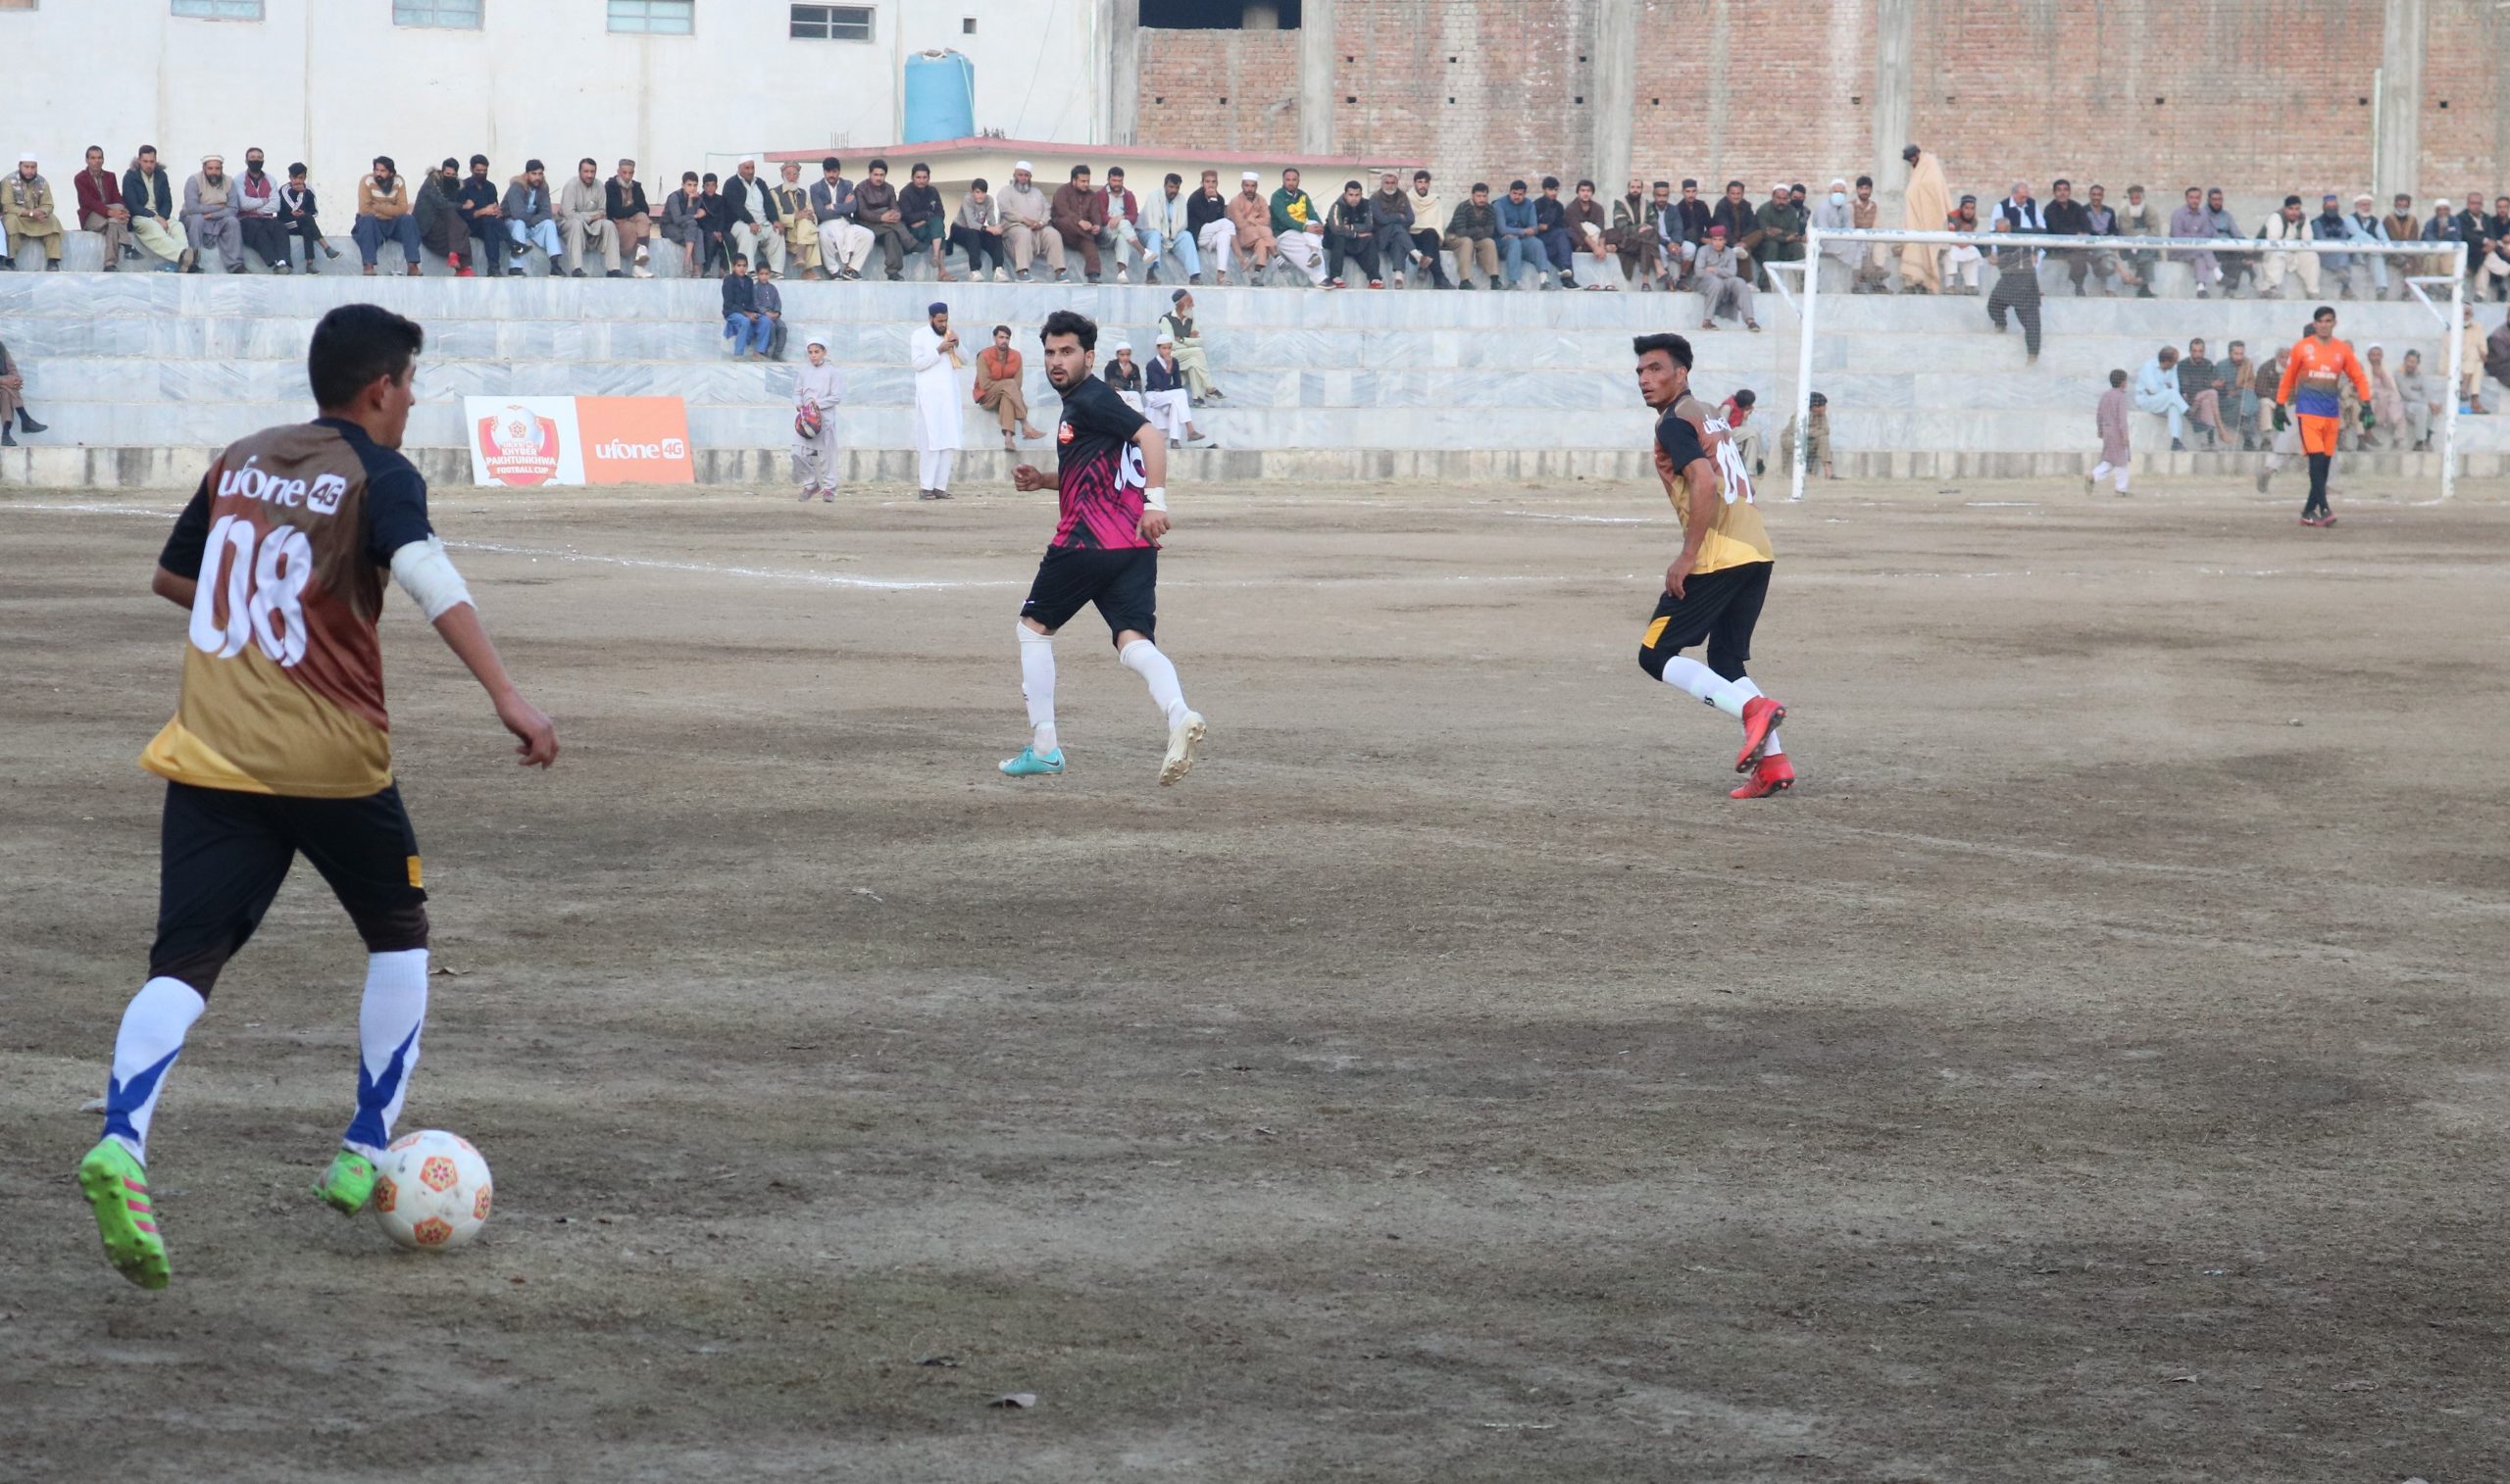 Thrilling Eliminator Round of Ufone 4G Khyber Pakhtunkhwa Football Cup inches closer to conclusion